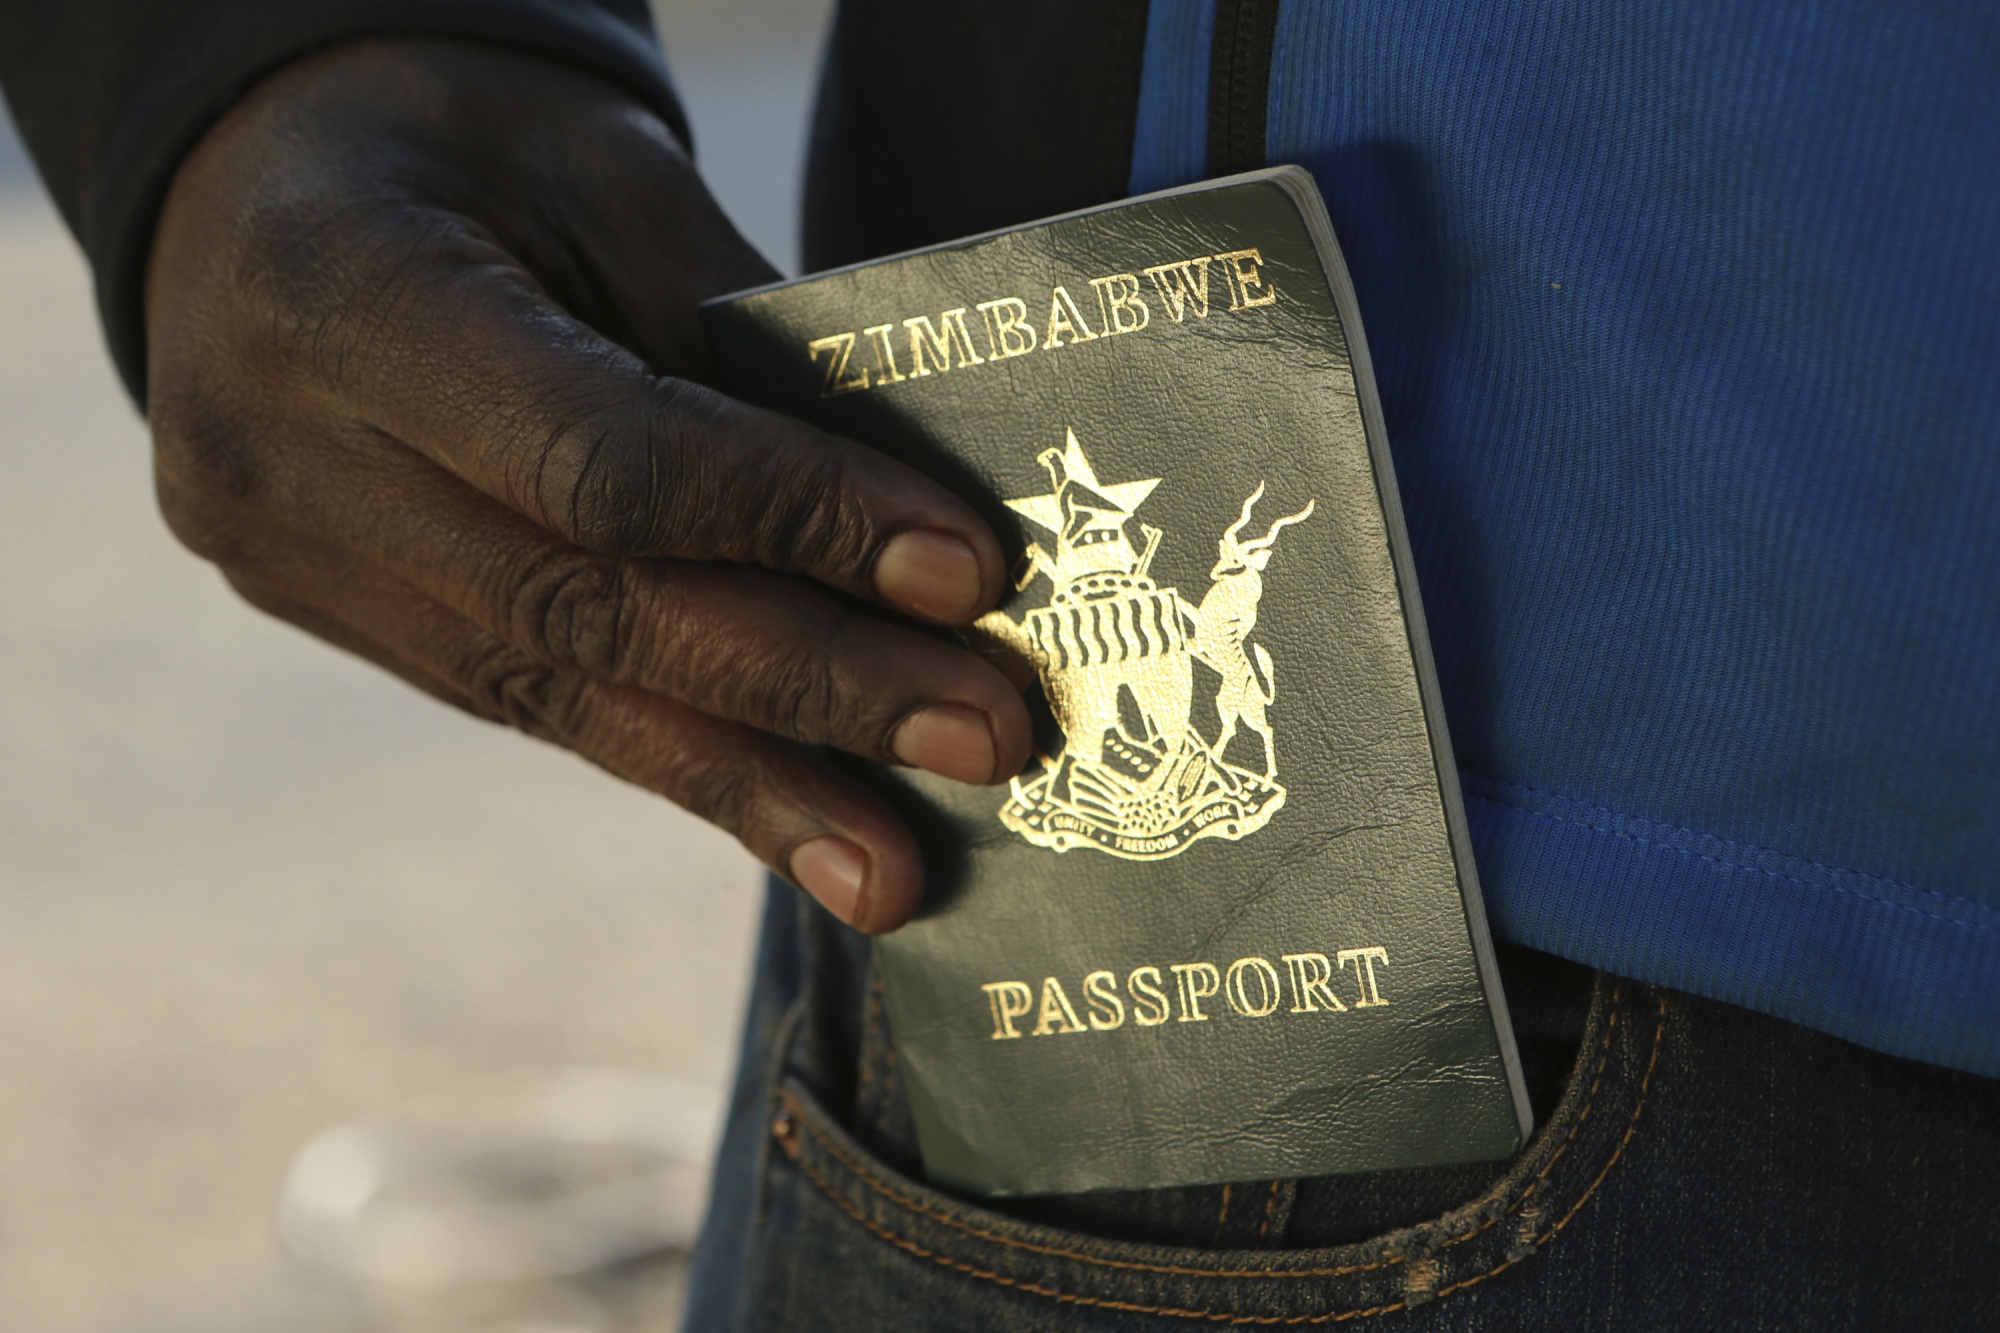 Demand For Passports Soars in Zimbabwe as Steep Price Hike Looms